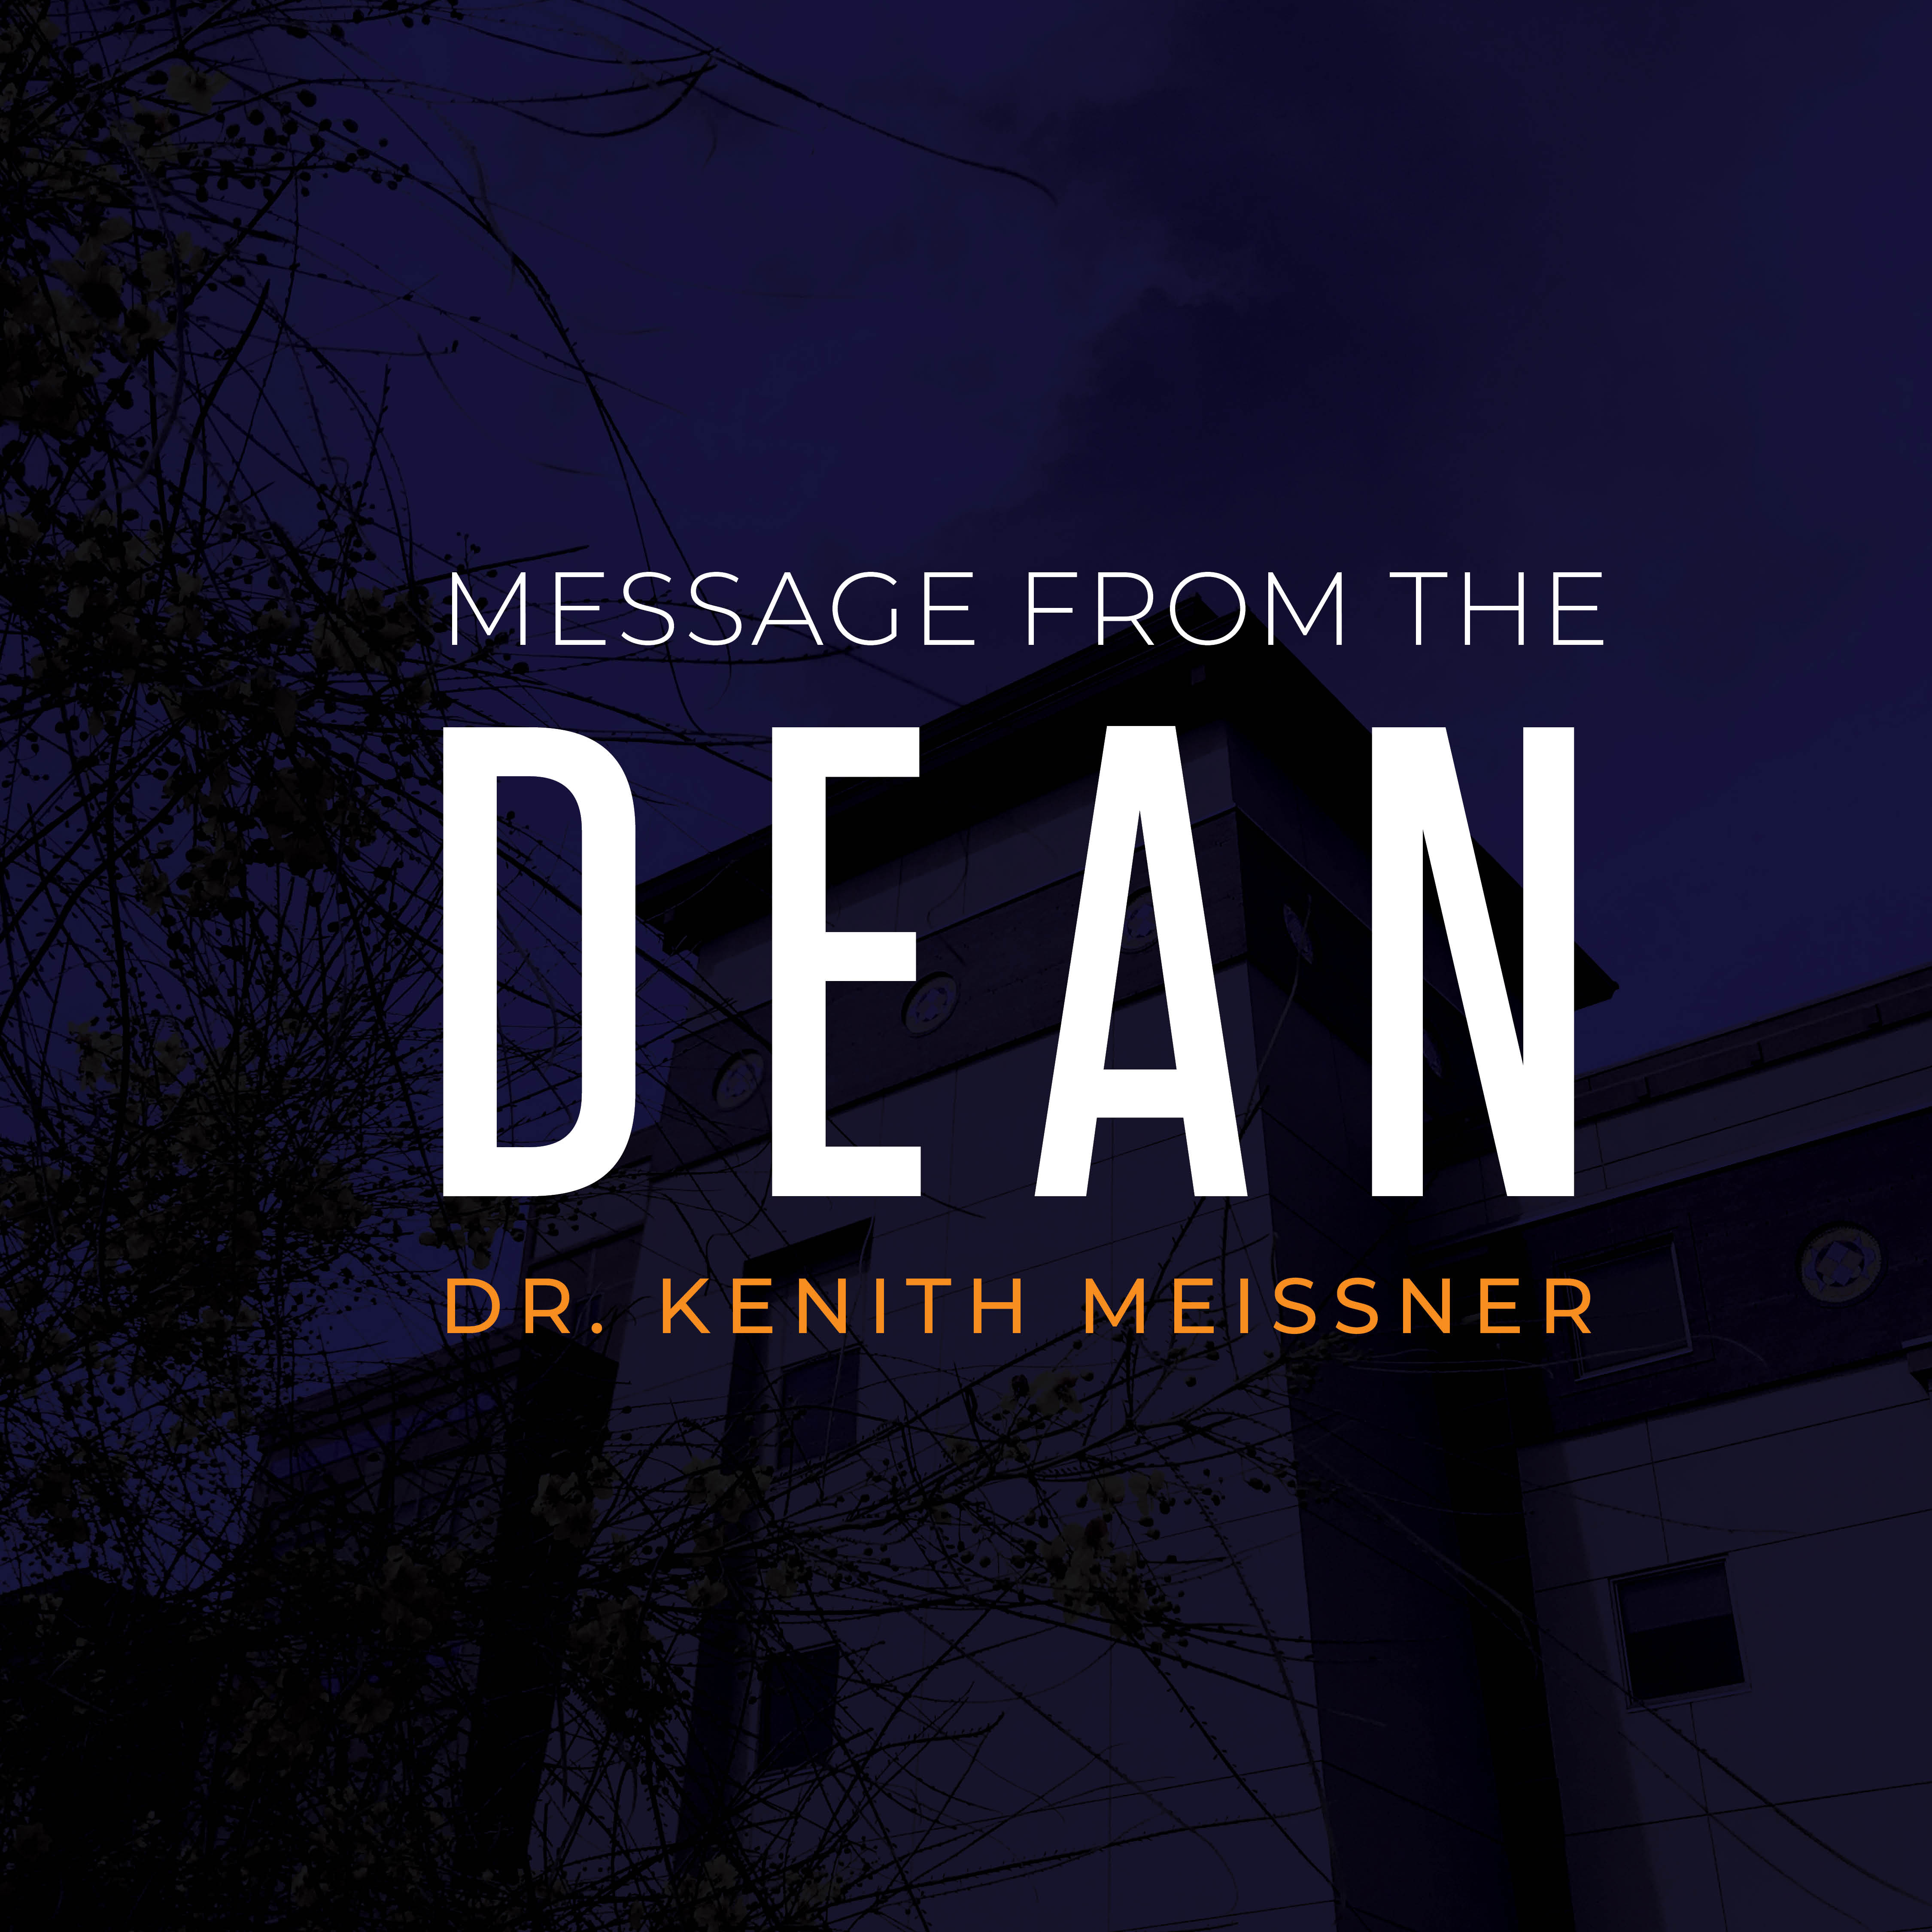 A MESSAGE FROM KENITH MEISSNER